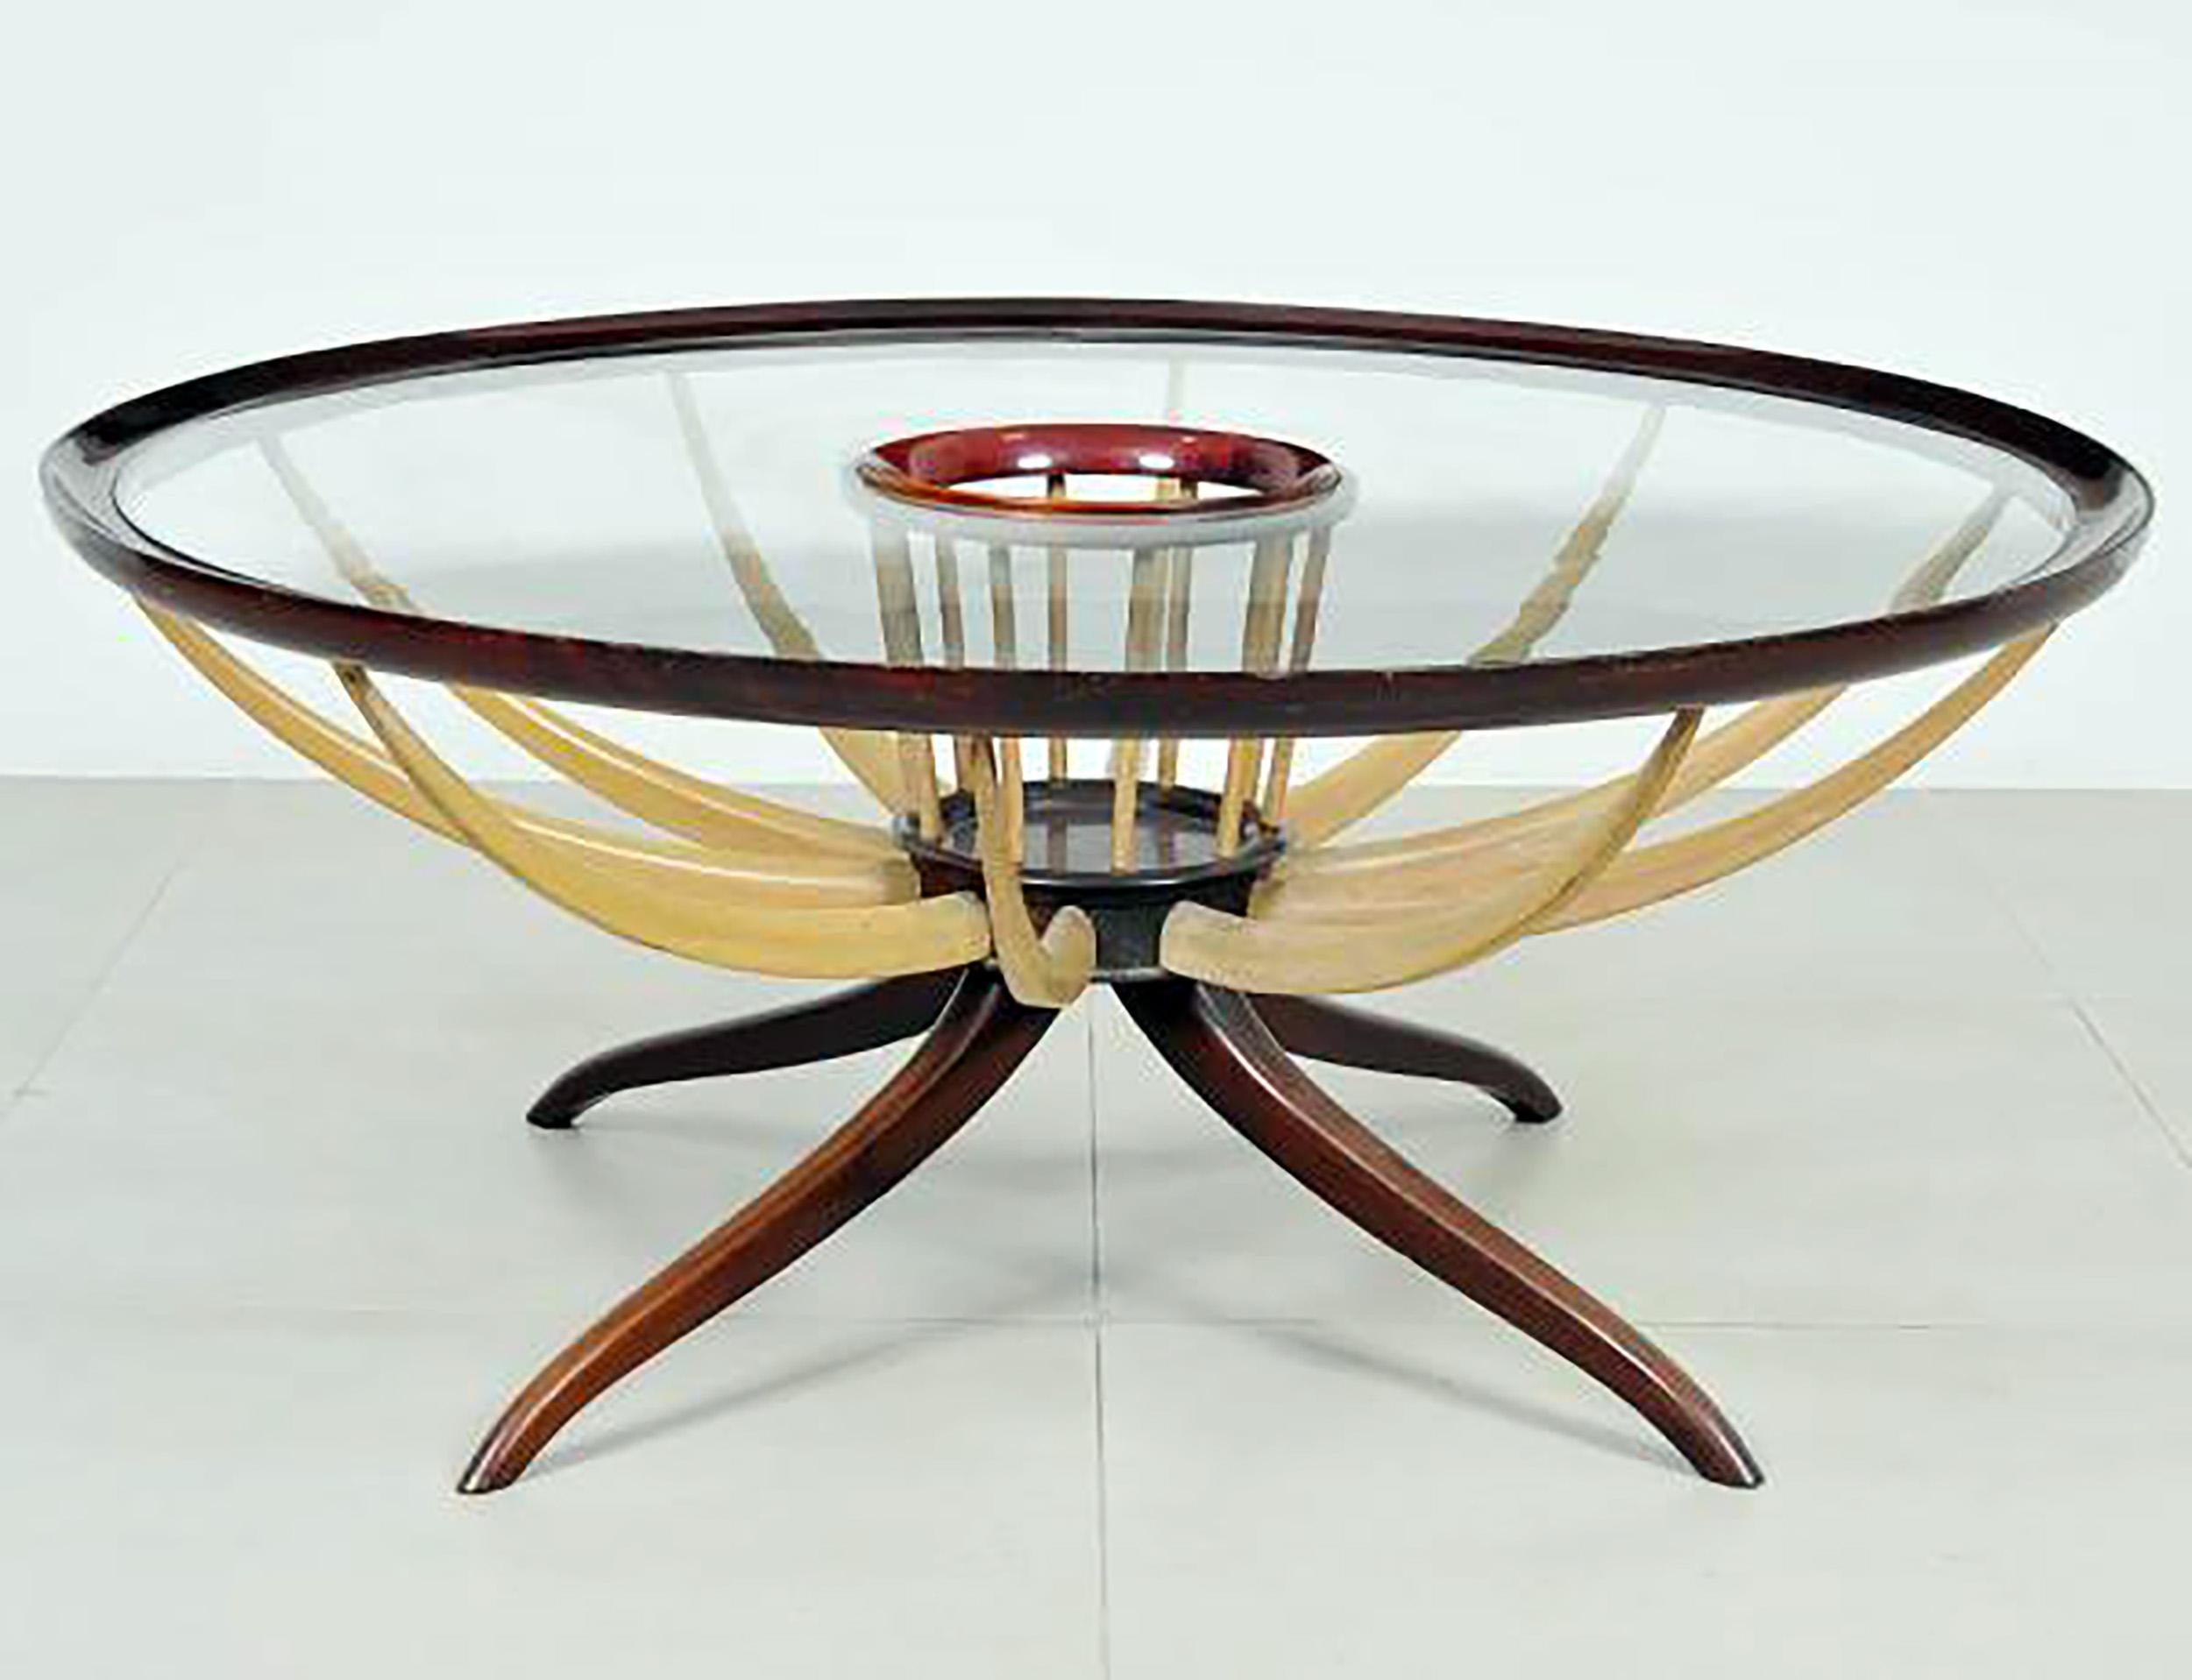 This table inspired by the coffee table model 